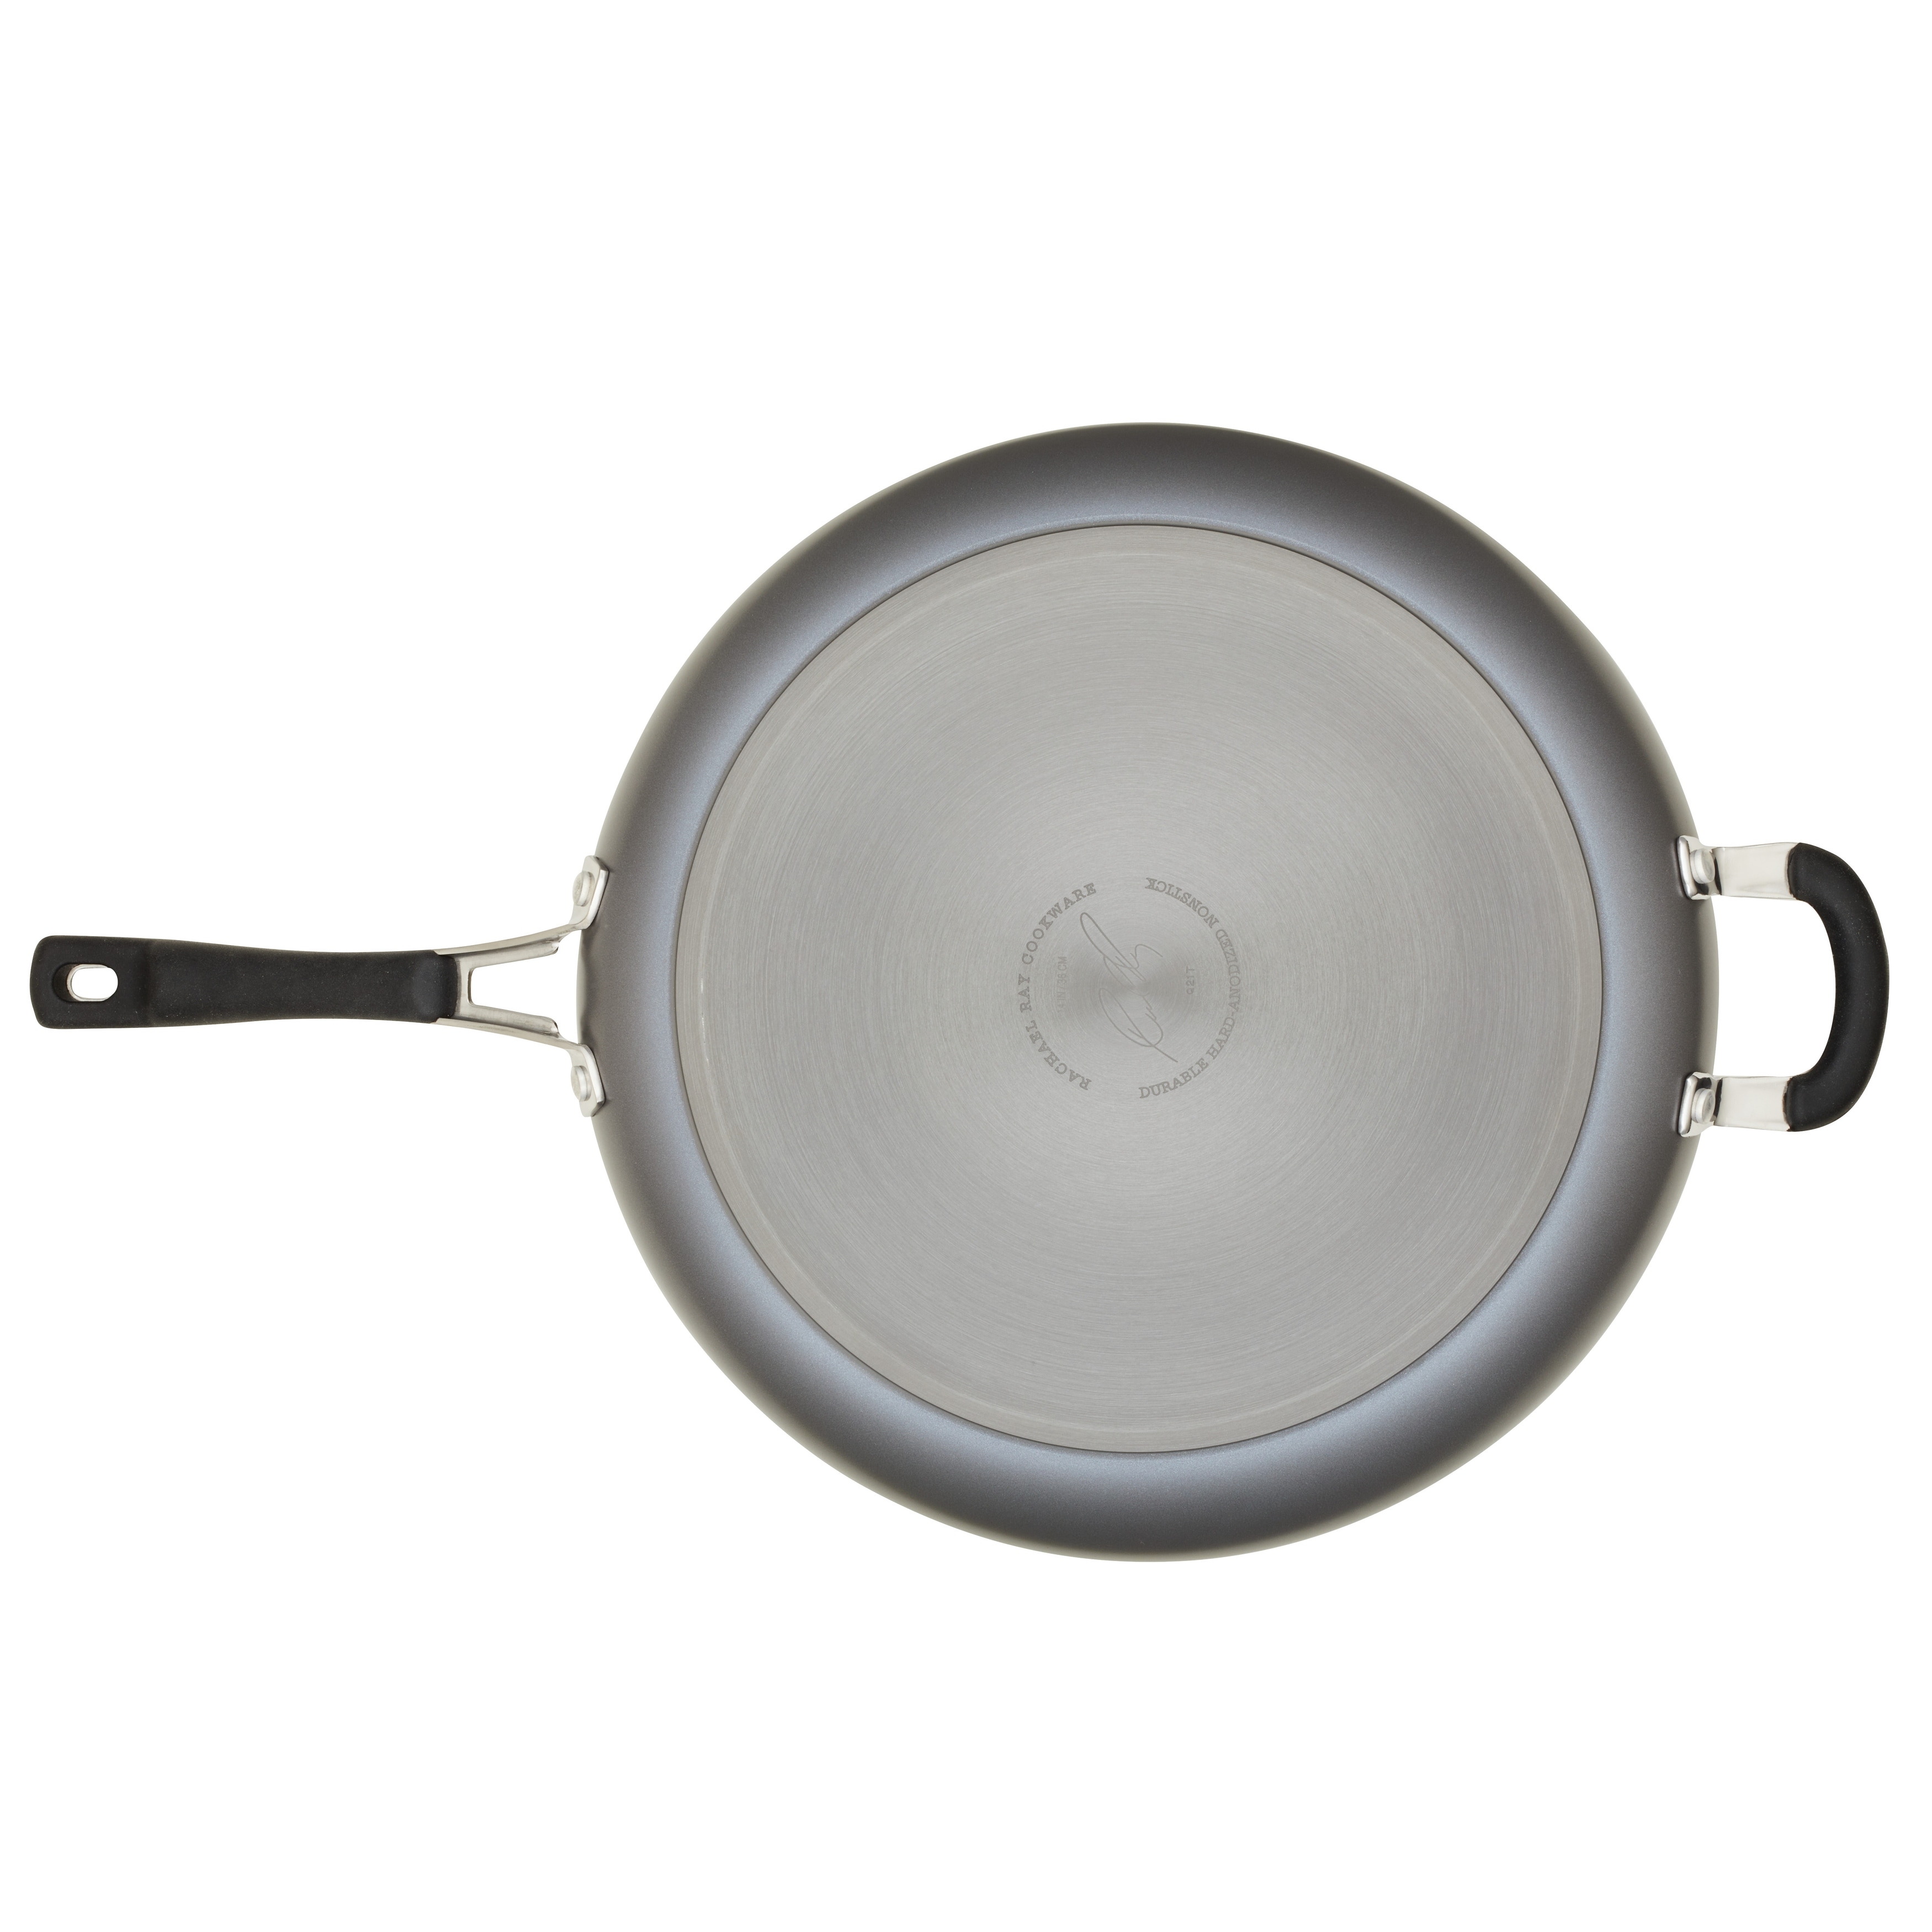 Rachael Ray Cook + Create Hard Anodized Nonstick Frying Pan with Helper  Handle, 14-Inch, Black - On Sale - Bed Bath & Beyond - 37974532